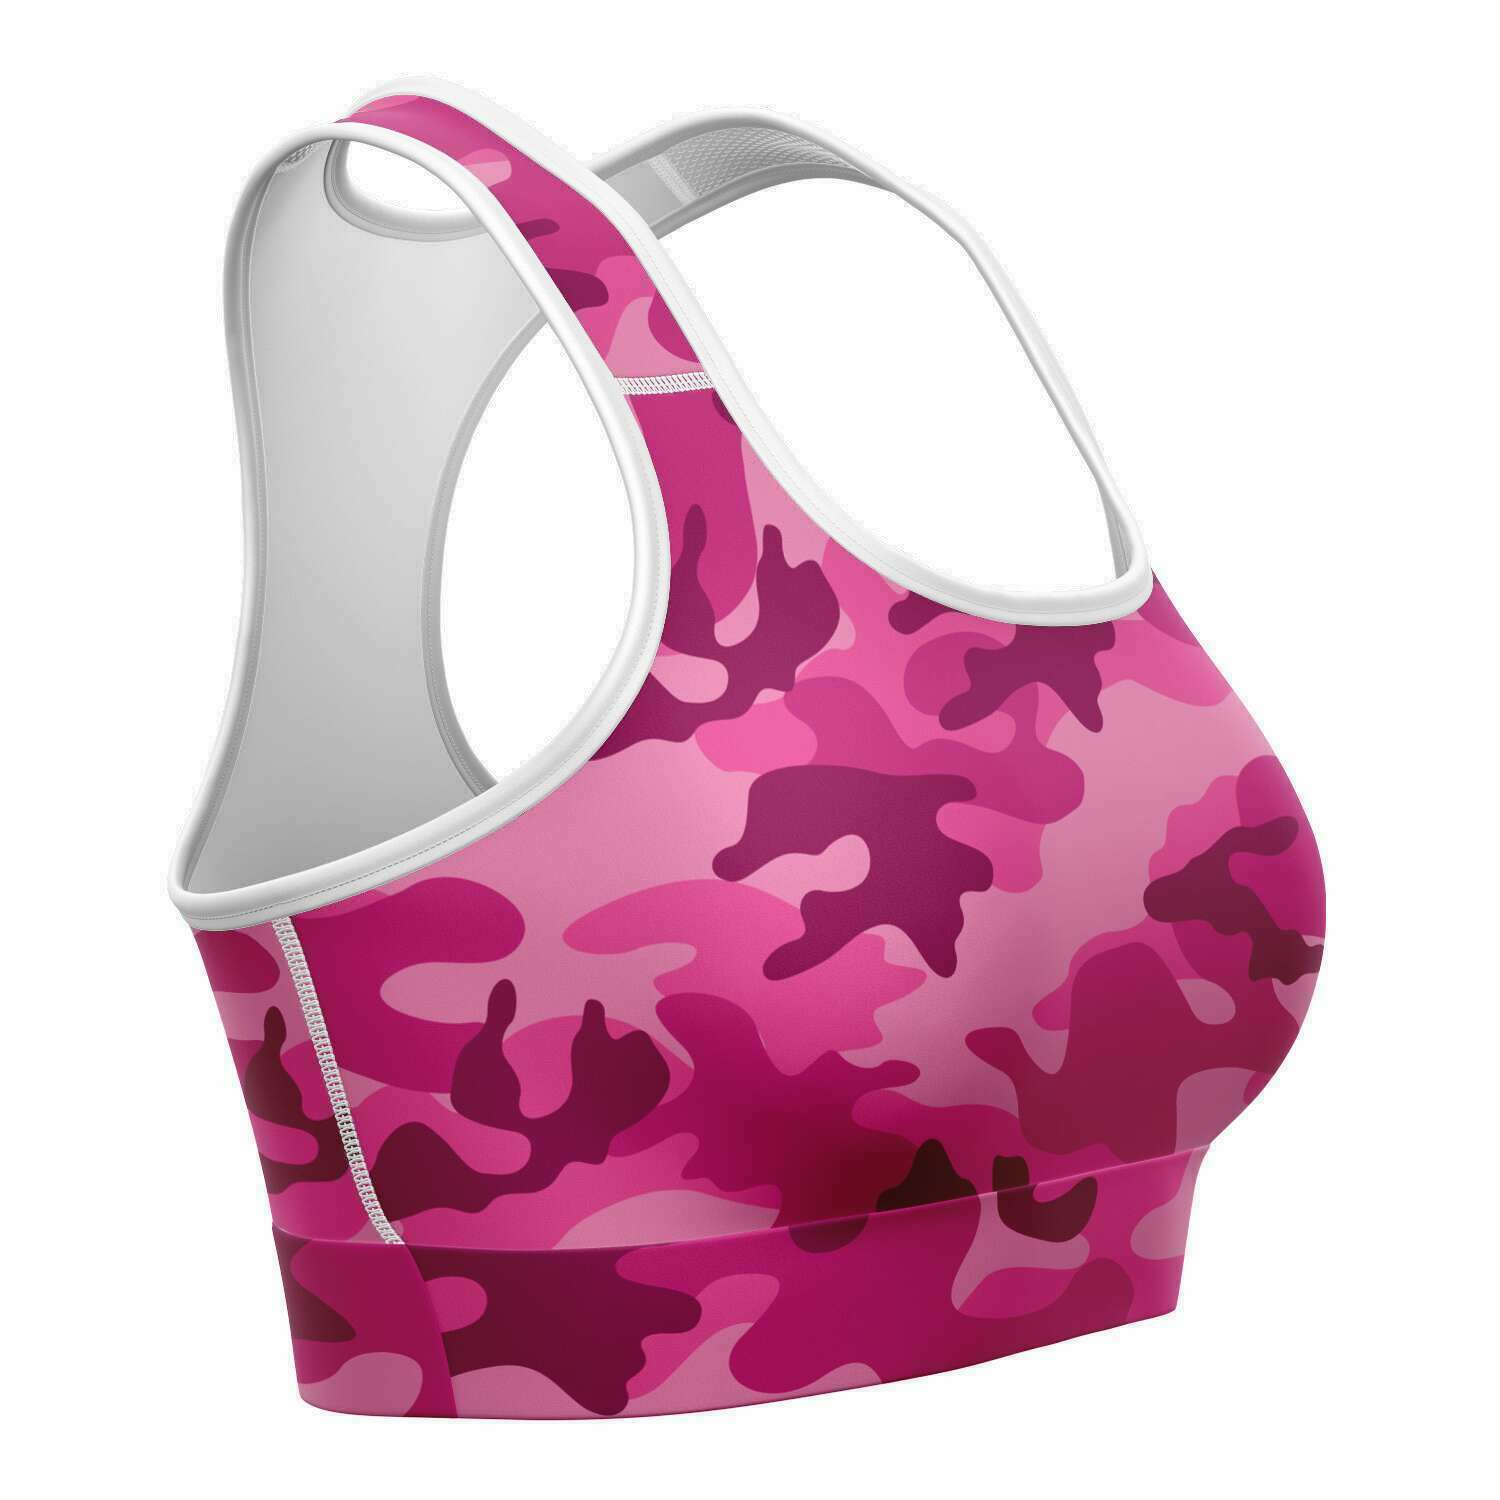 Women's All Pink Camouflage Athletic Sports Bra Right